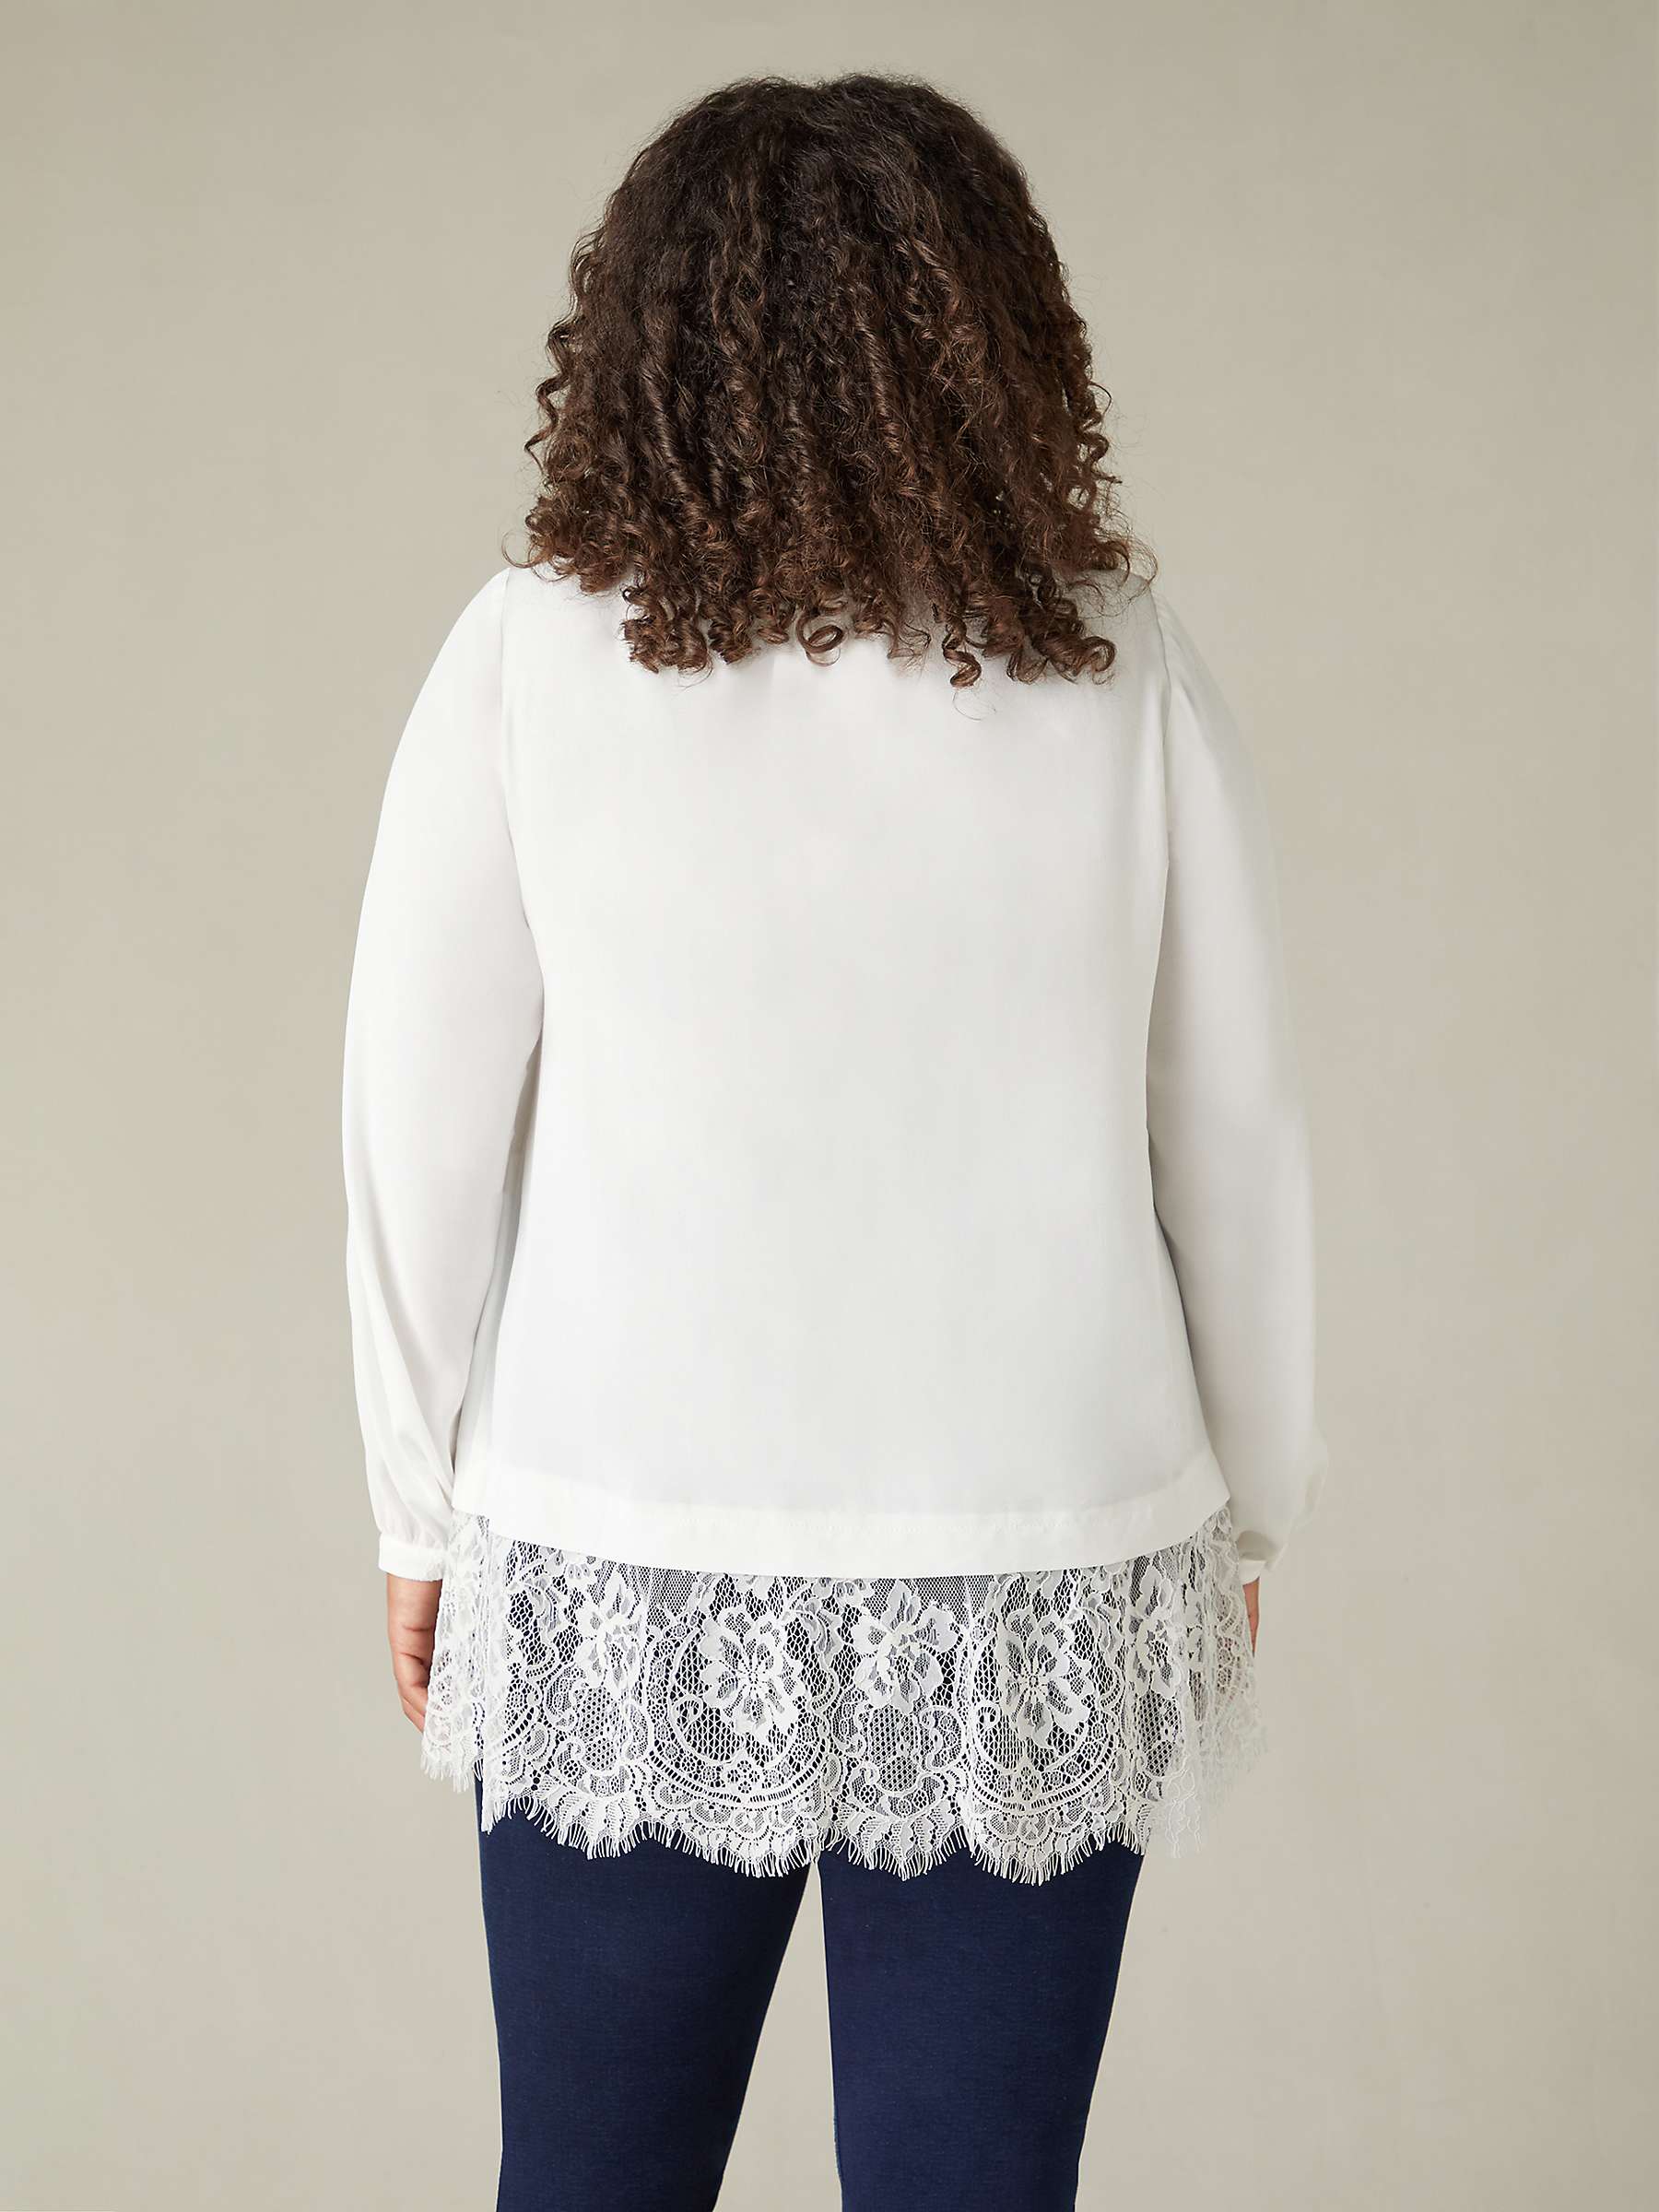 Buy Live Unlimited Curve Lace Tie Neck Tunic Top, White Online at johnlewis.com